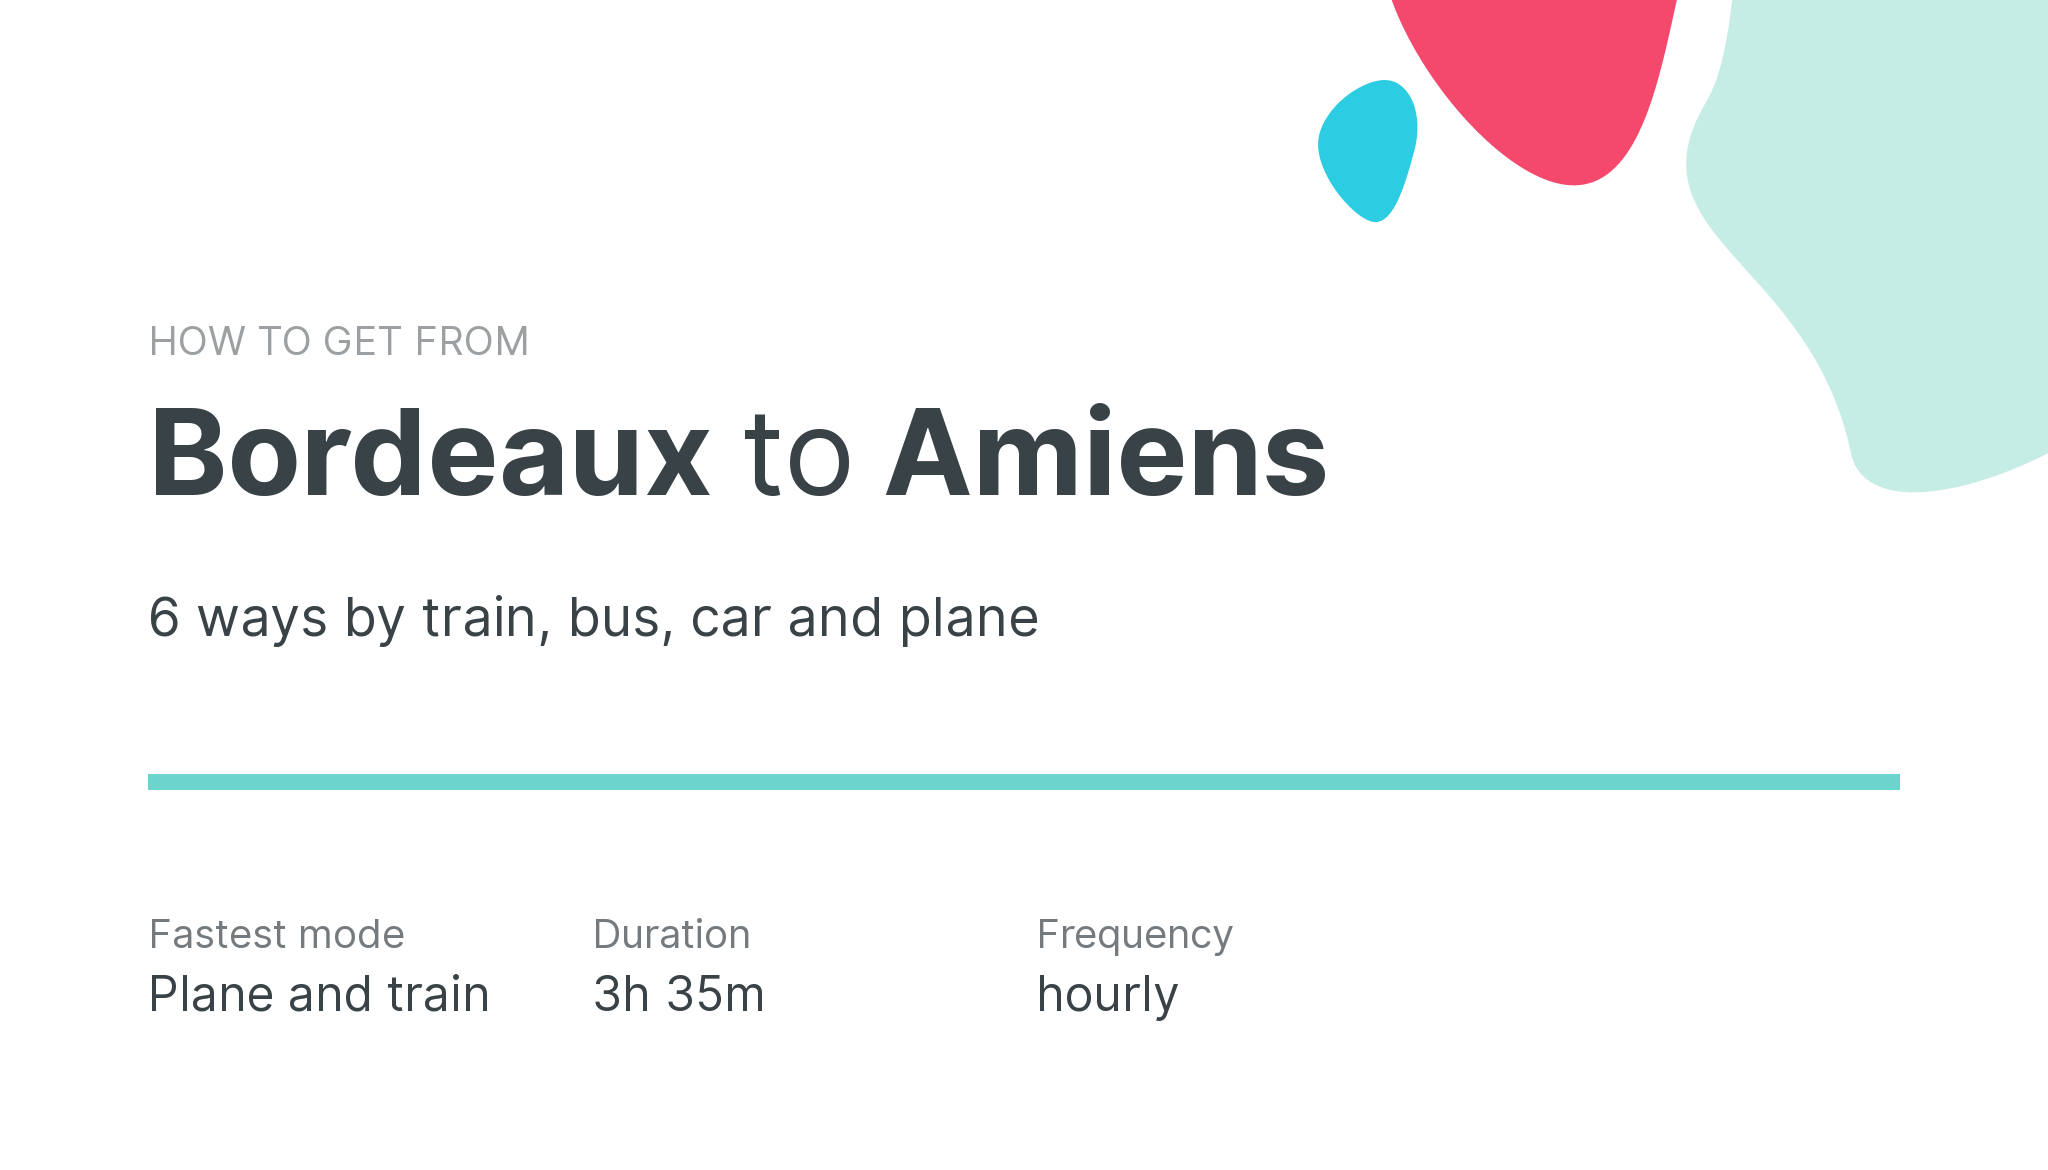 How do I get from Bordeaux to Amiens